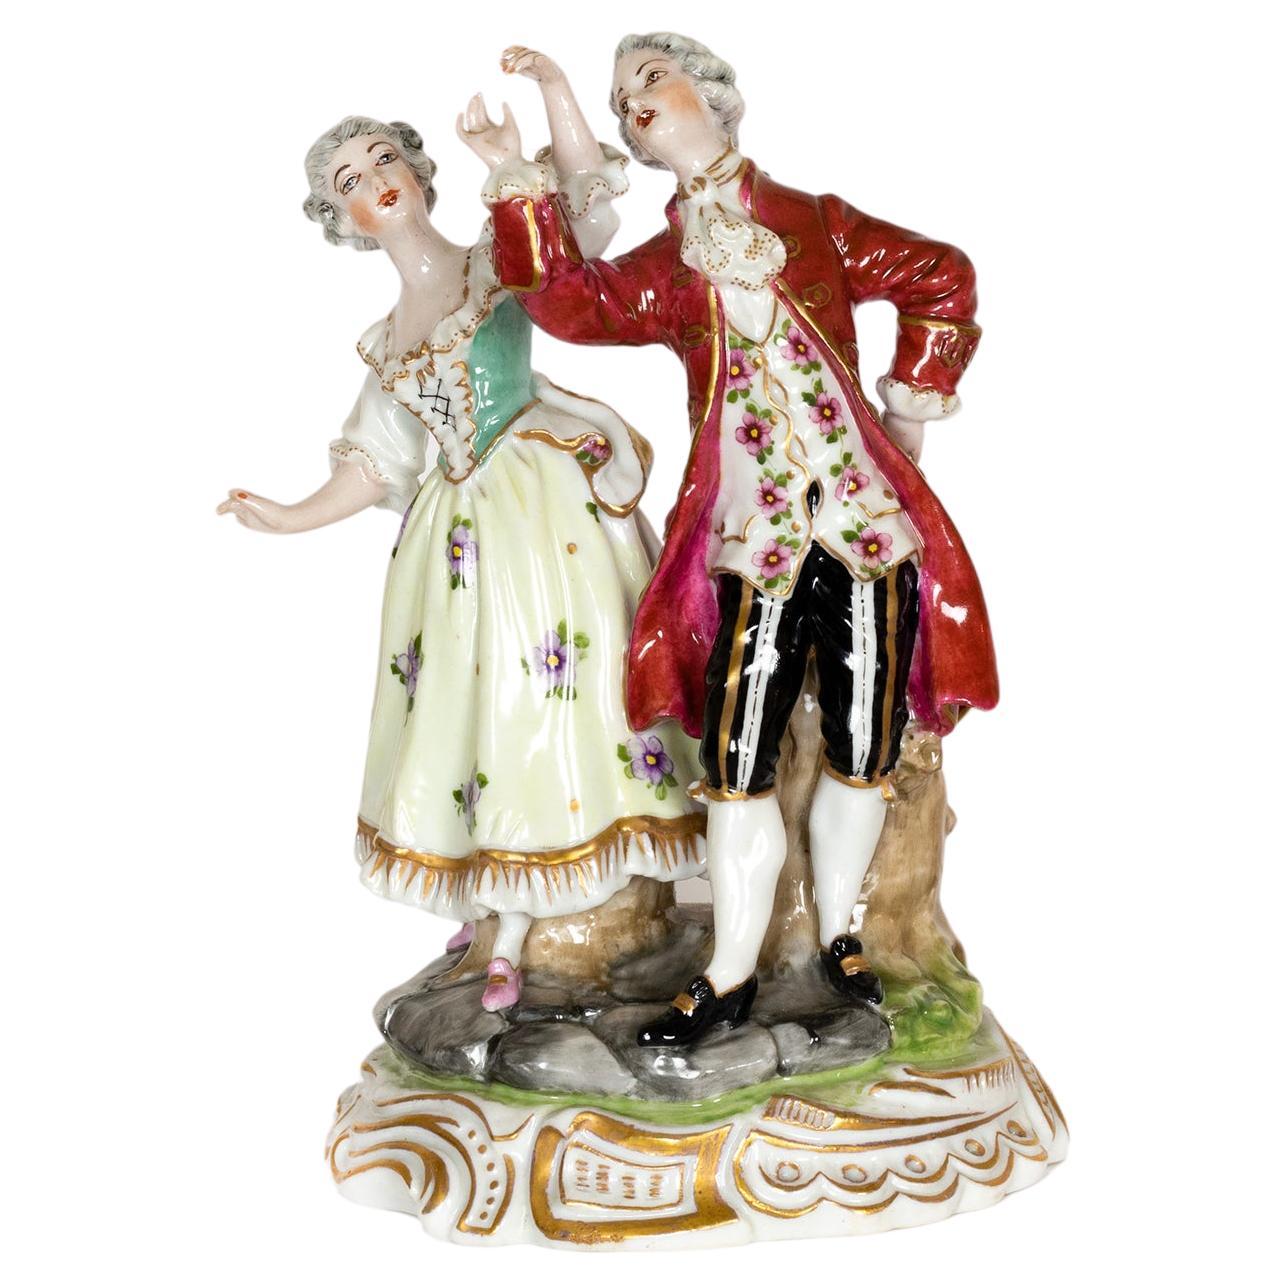 18th Century Porcelain dancing couple figurine by Volkstedt 